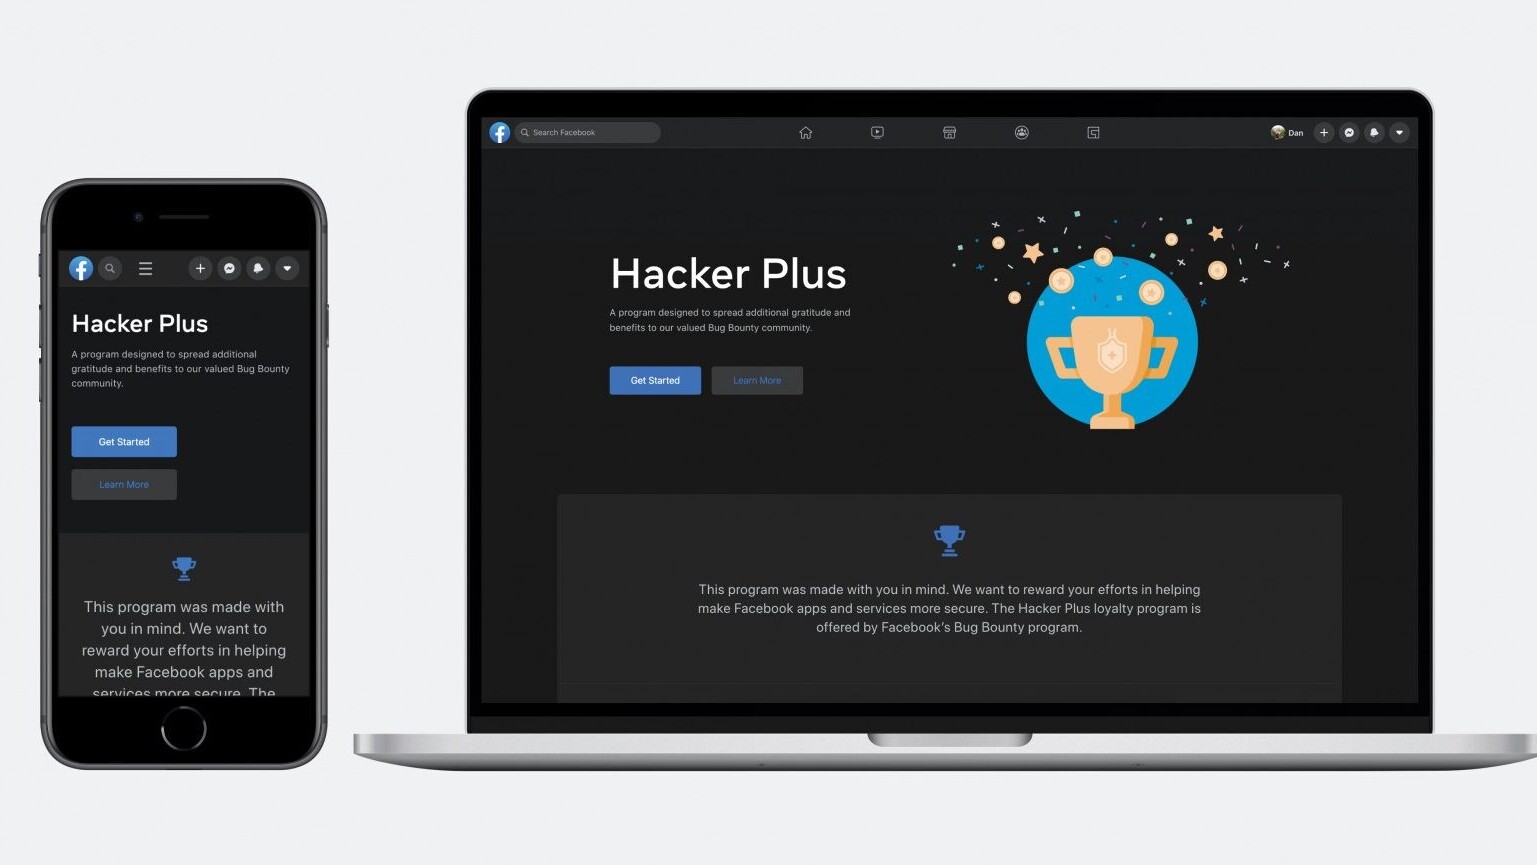 Facebook now has a loyalty program for its bug bounty hunters on its platform